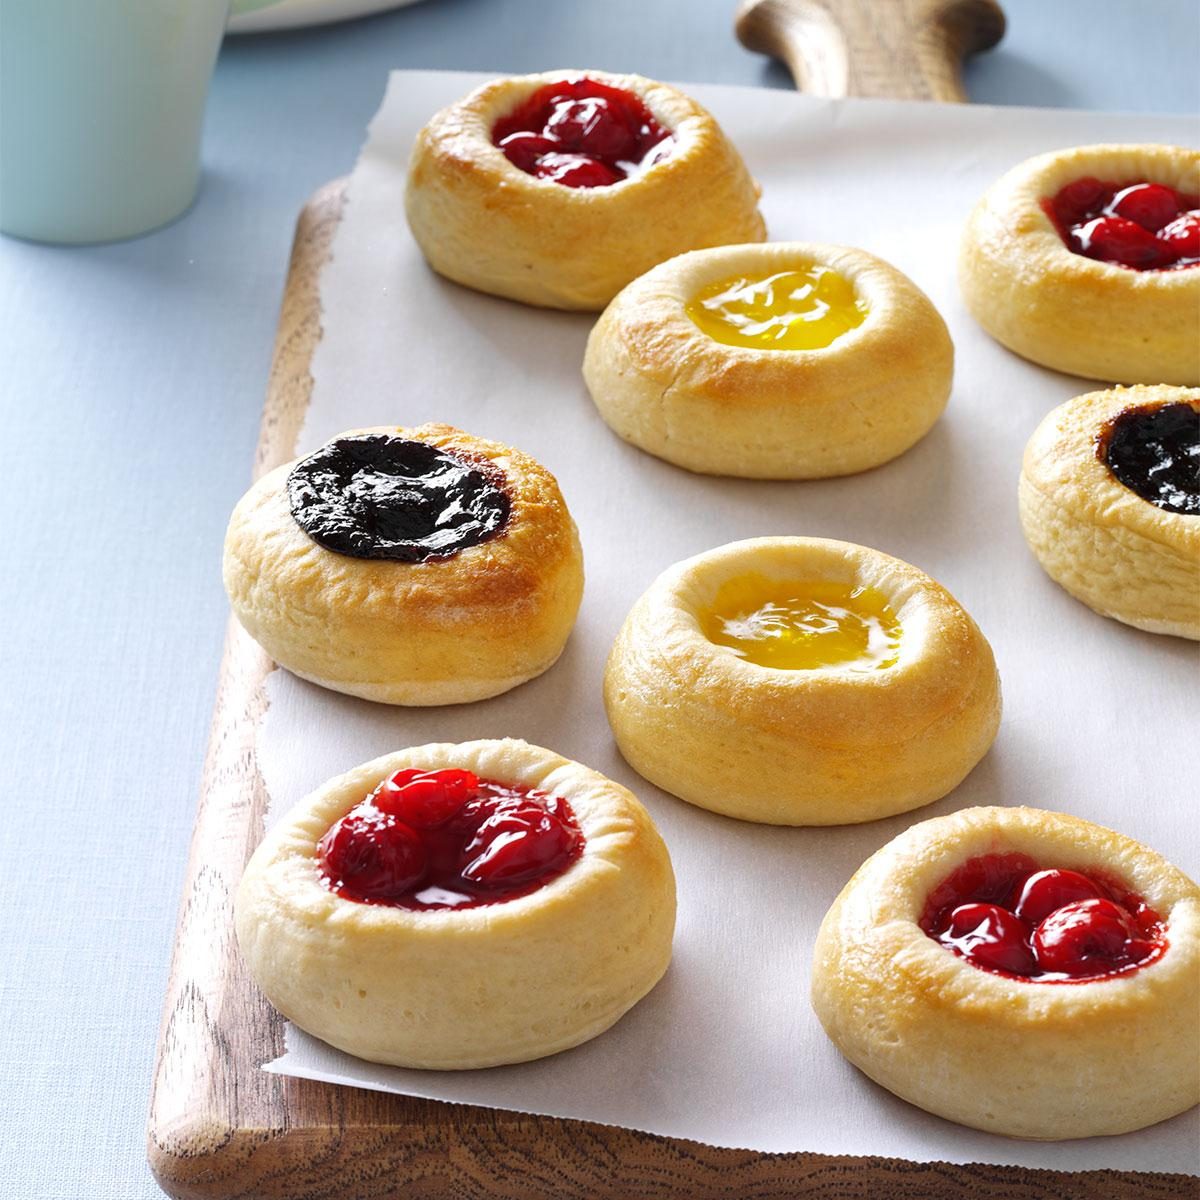 Inspired by Frances's Kolaches